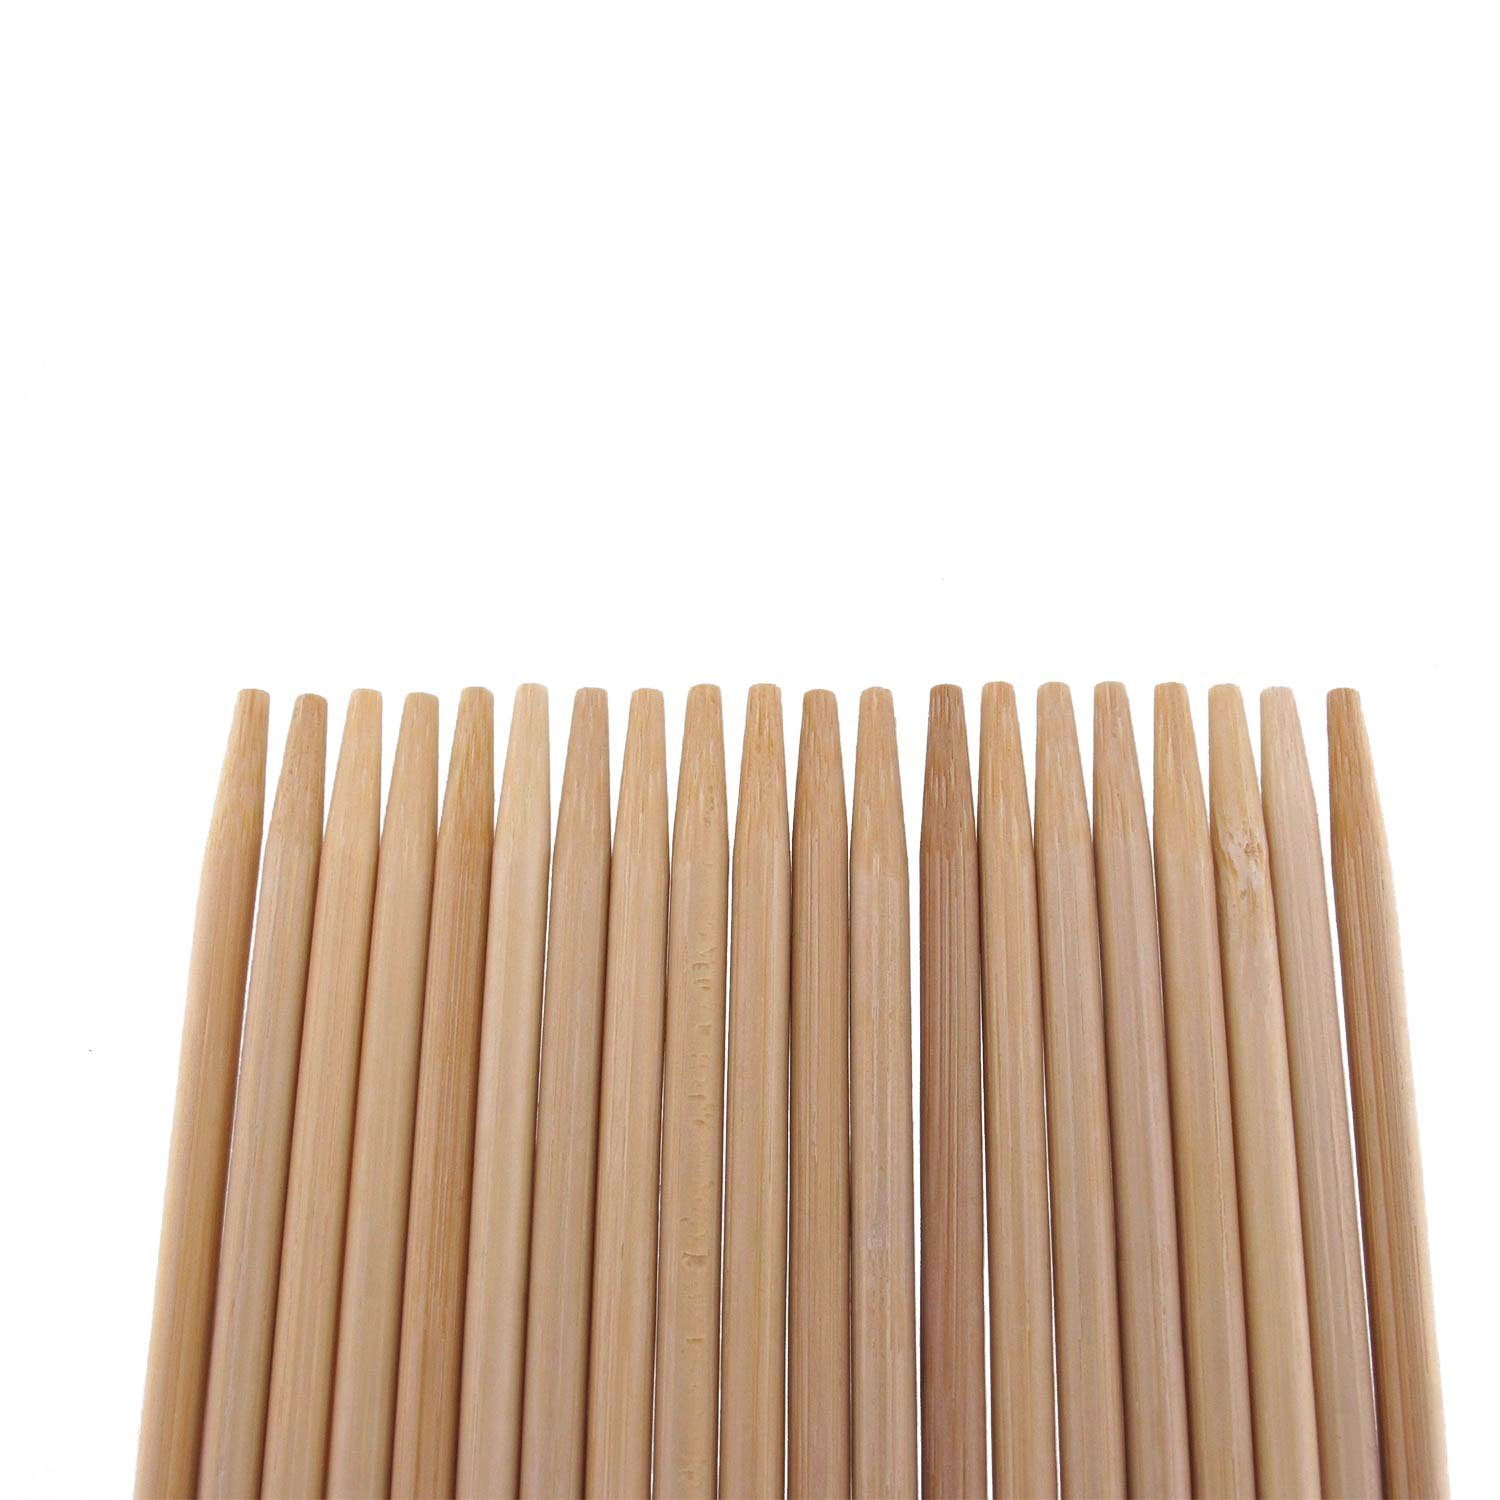 2.5ft Garden Sticks 100 Pieces Perfect for Camping or Outdoor Party 5mm Thick Safe Extra Long Multipurpose Marshmallow Smores Roasting Bamboo Sticks Skewers BambooMN Premium 30 Inch